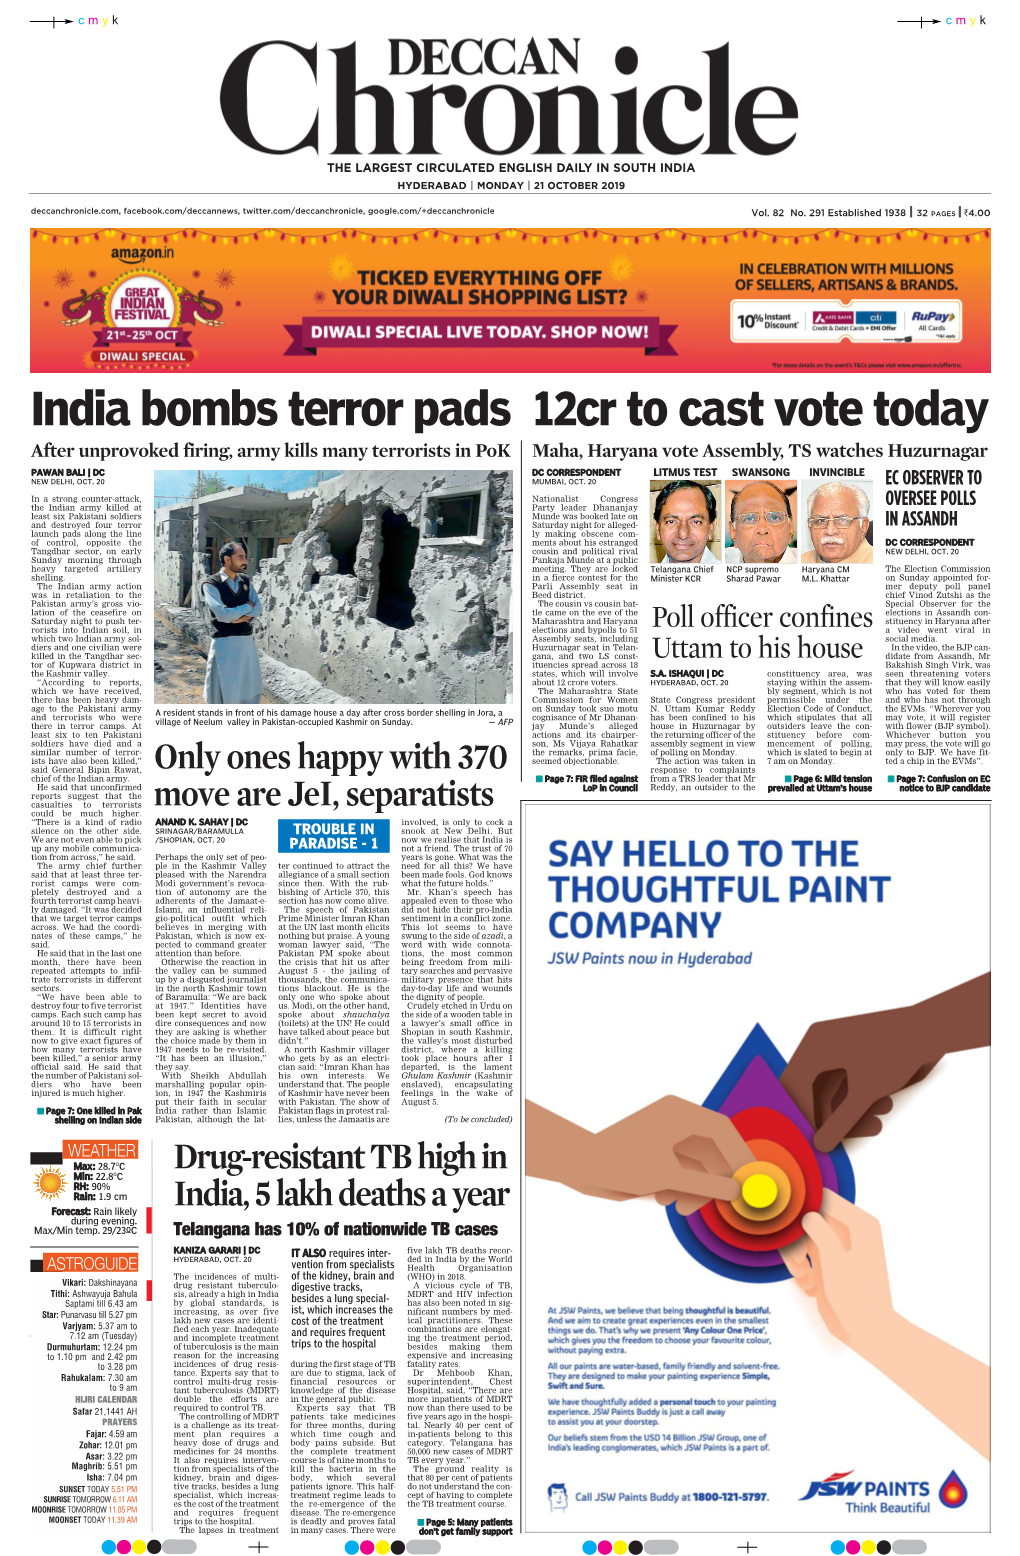 India Bombs Terror Pads 12Cr to Cast Vote Today